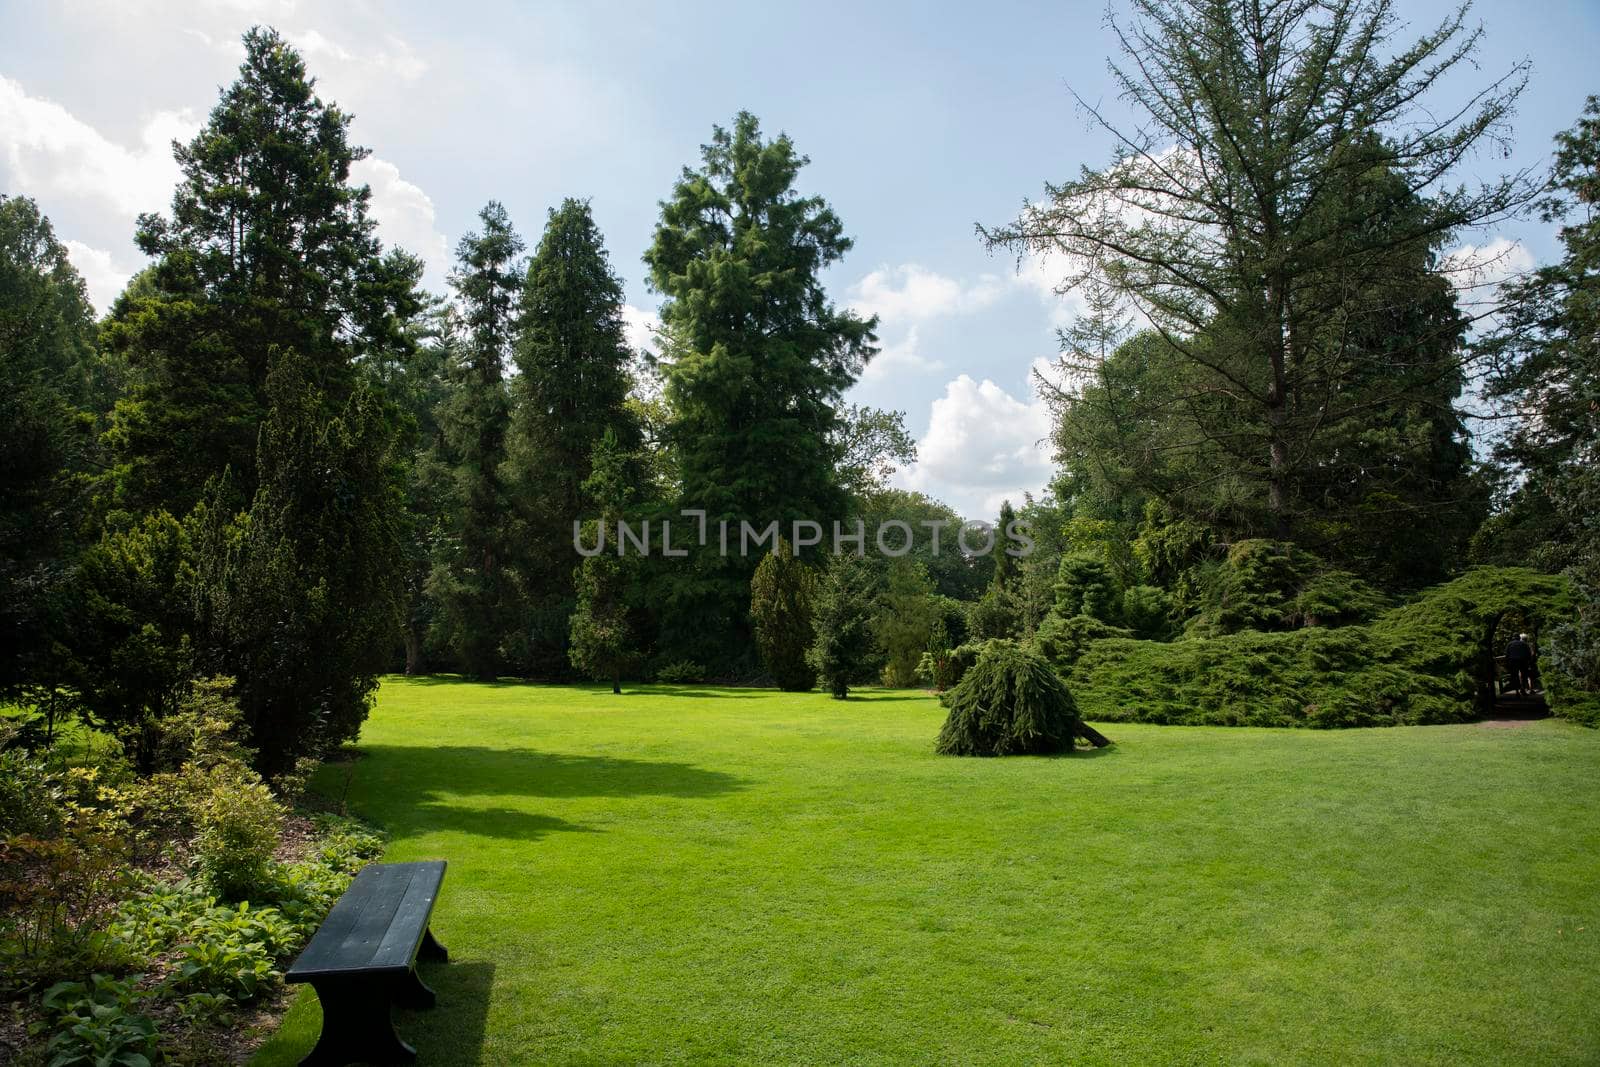 big landscape garden with big grass field and trees with bench to rest